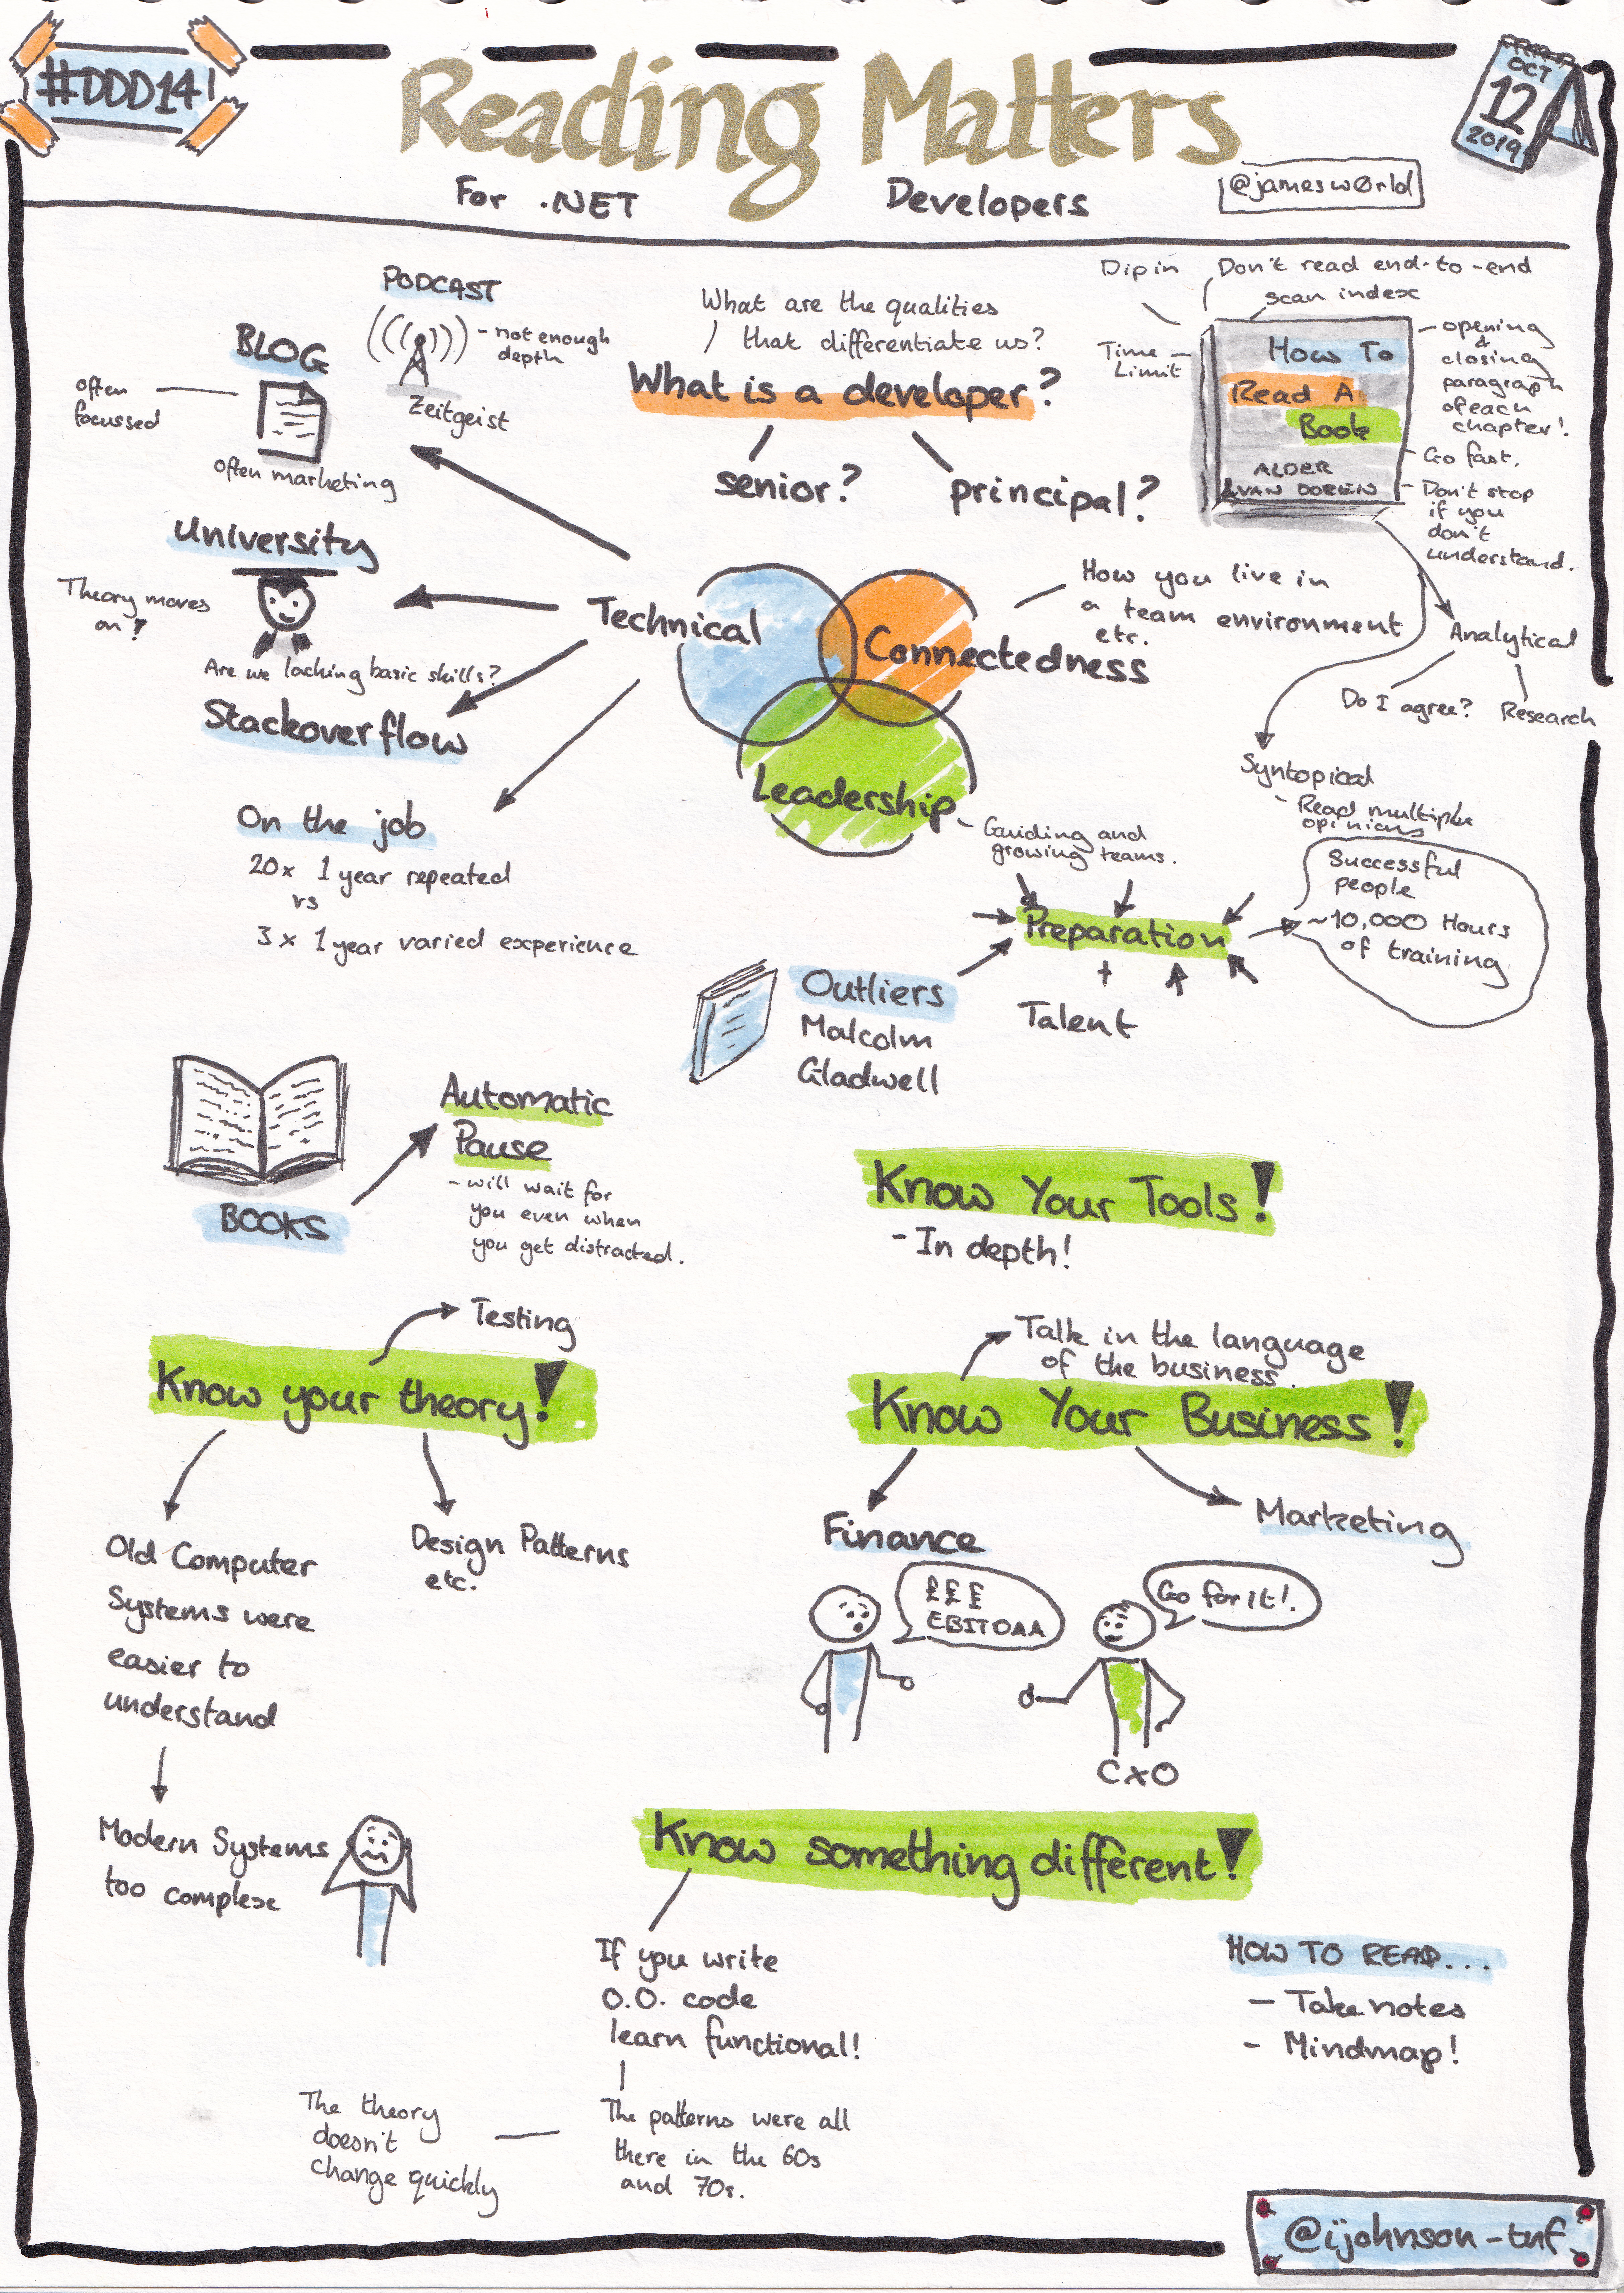 Sketchnotes from the talk 'Reading matters for .NET Developers' by James World